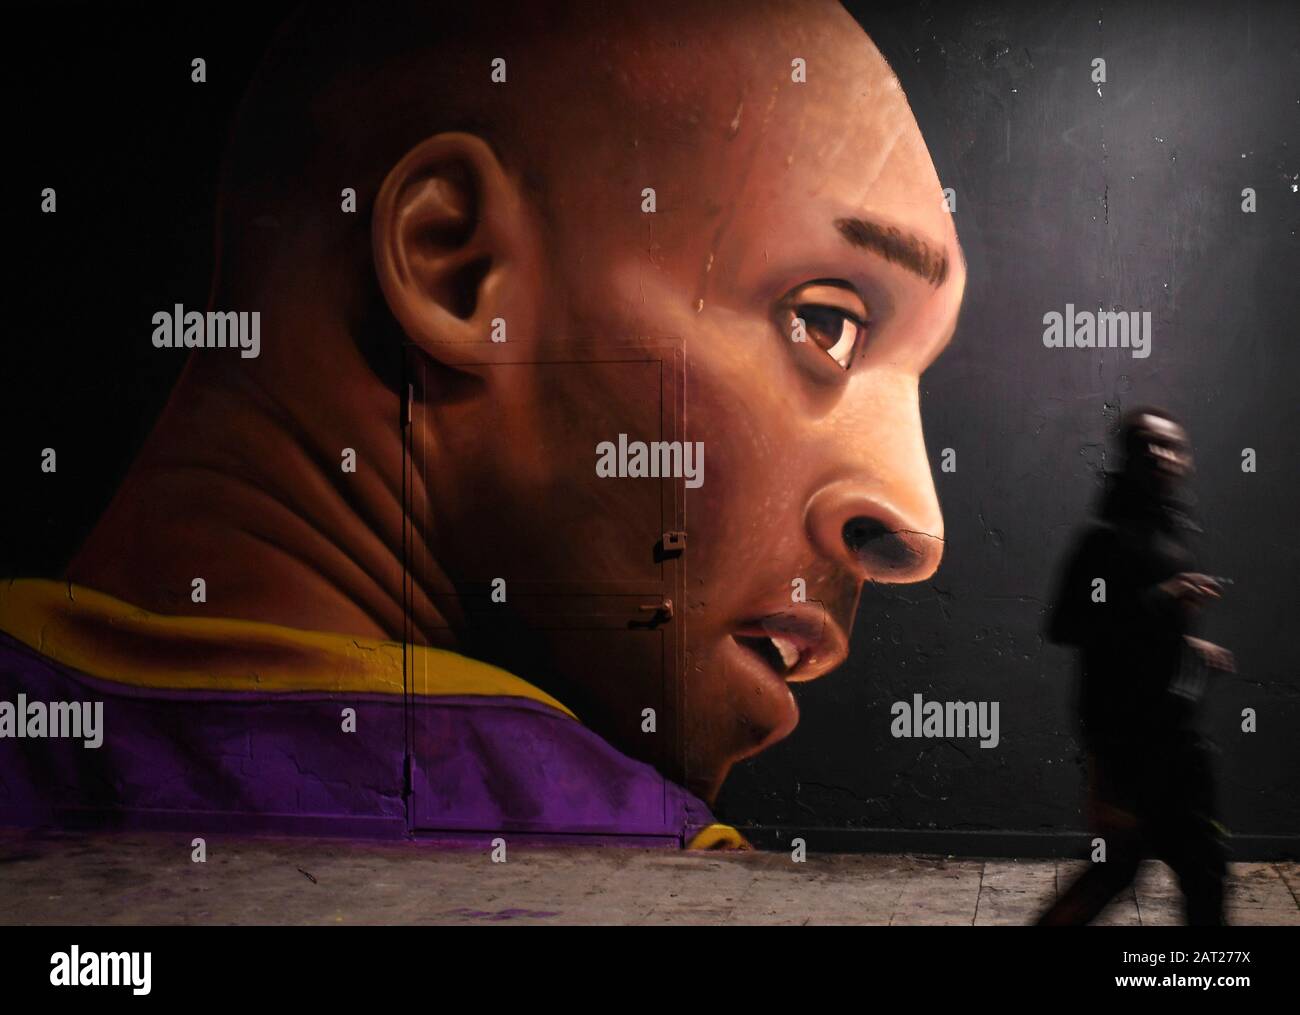 Naples, Italy. 29th Jan 2020. A mural of the former NBA star Kobe Bryant, painted after death, on the wall of the Naples Metro 29/01/2020, Naples, Italy Credit: Independent Photo Agency Srl/Alamy Live News Stock Photo